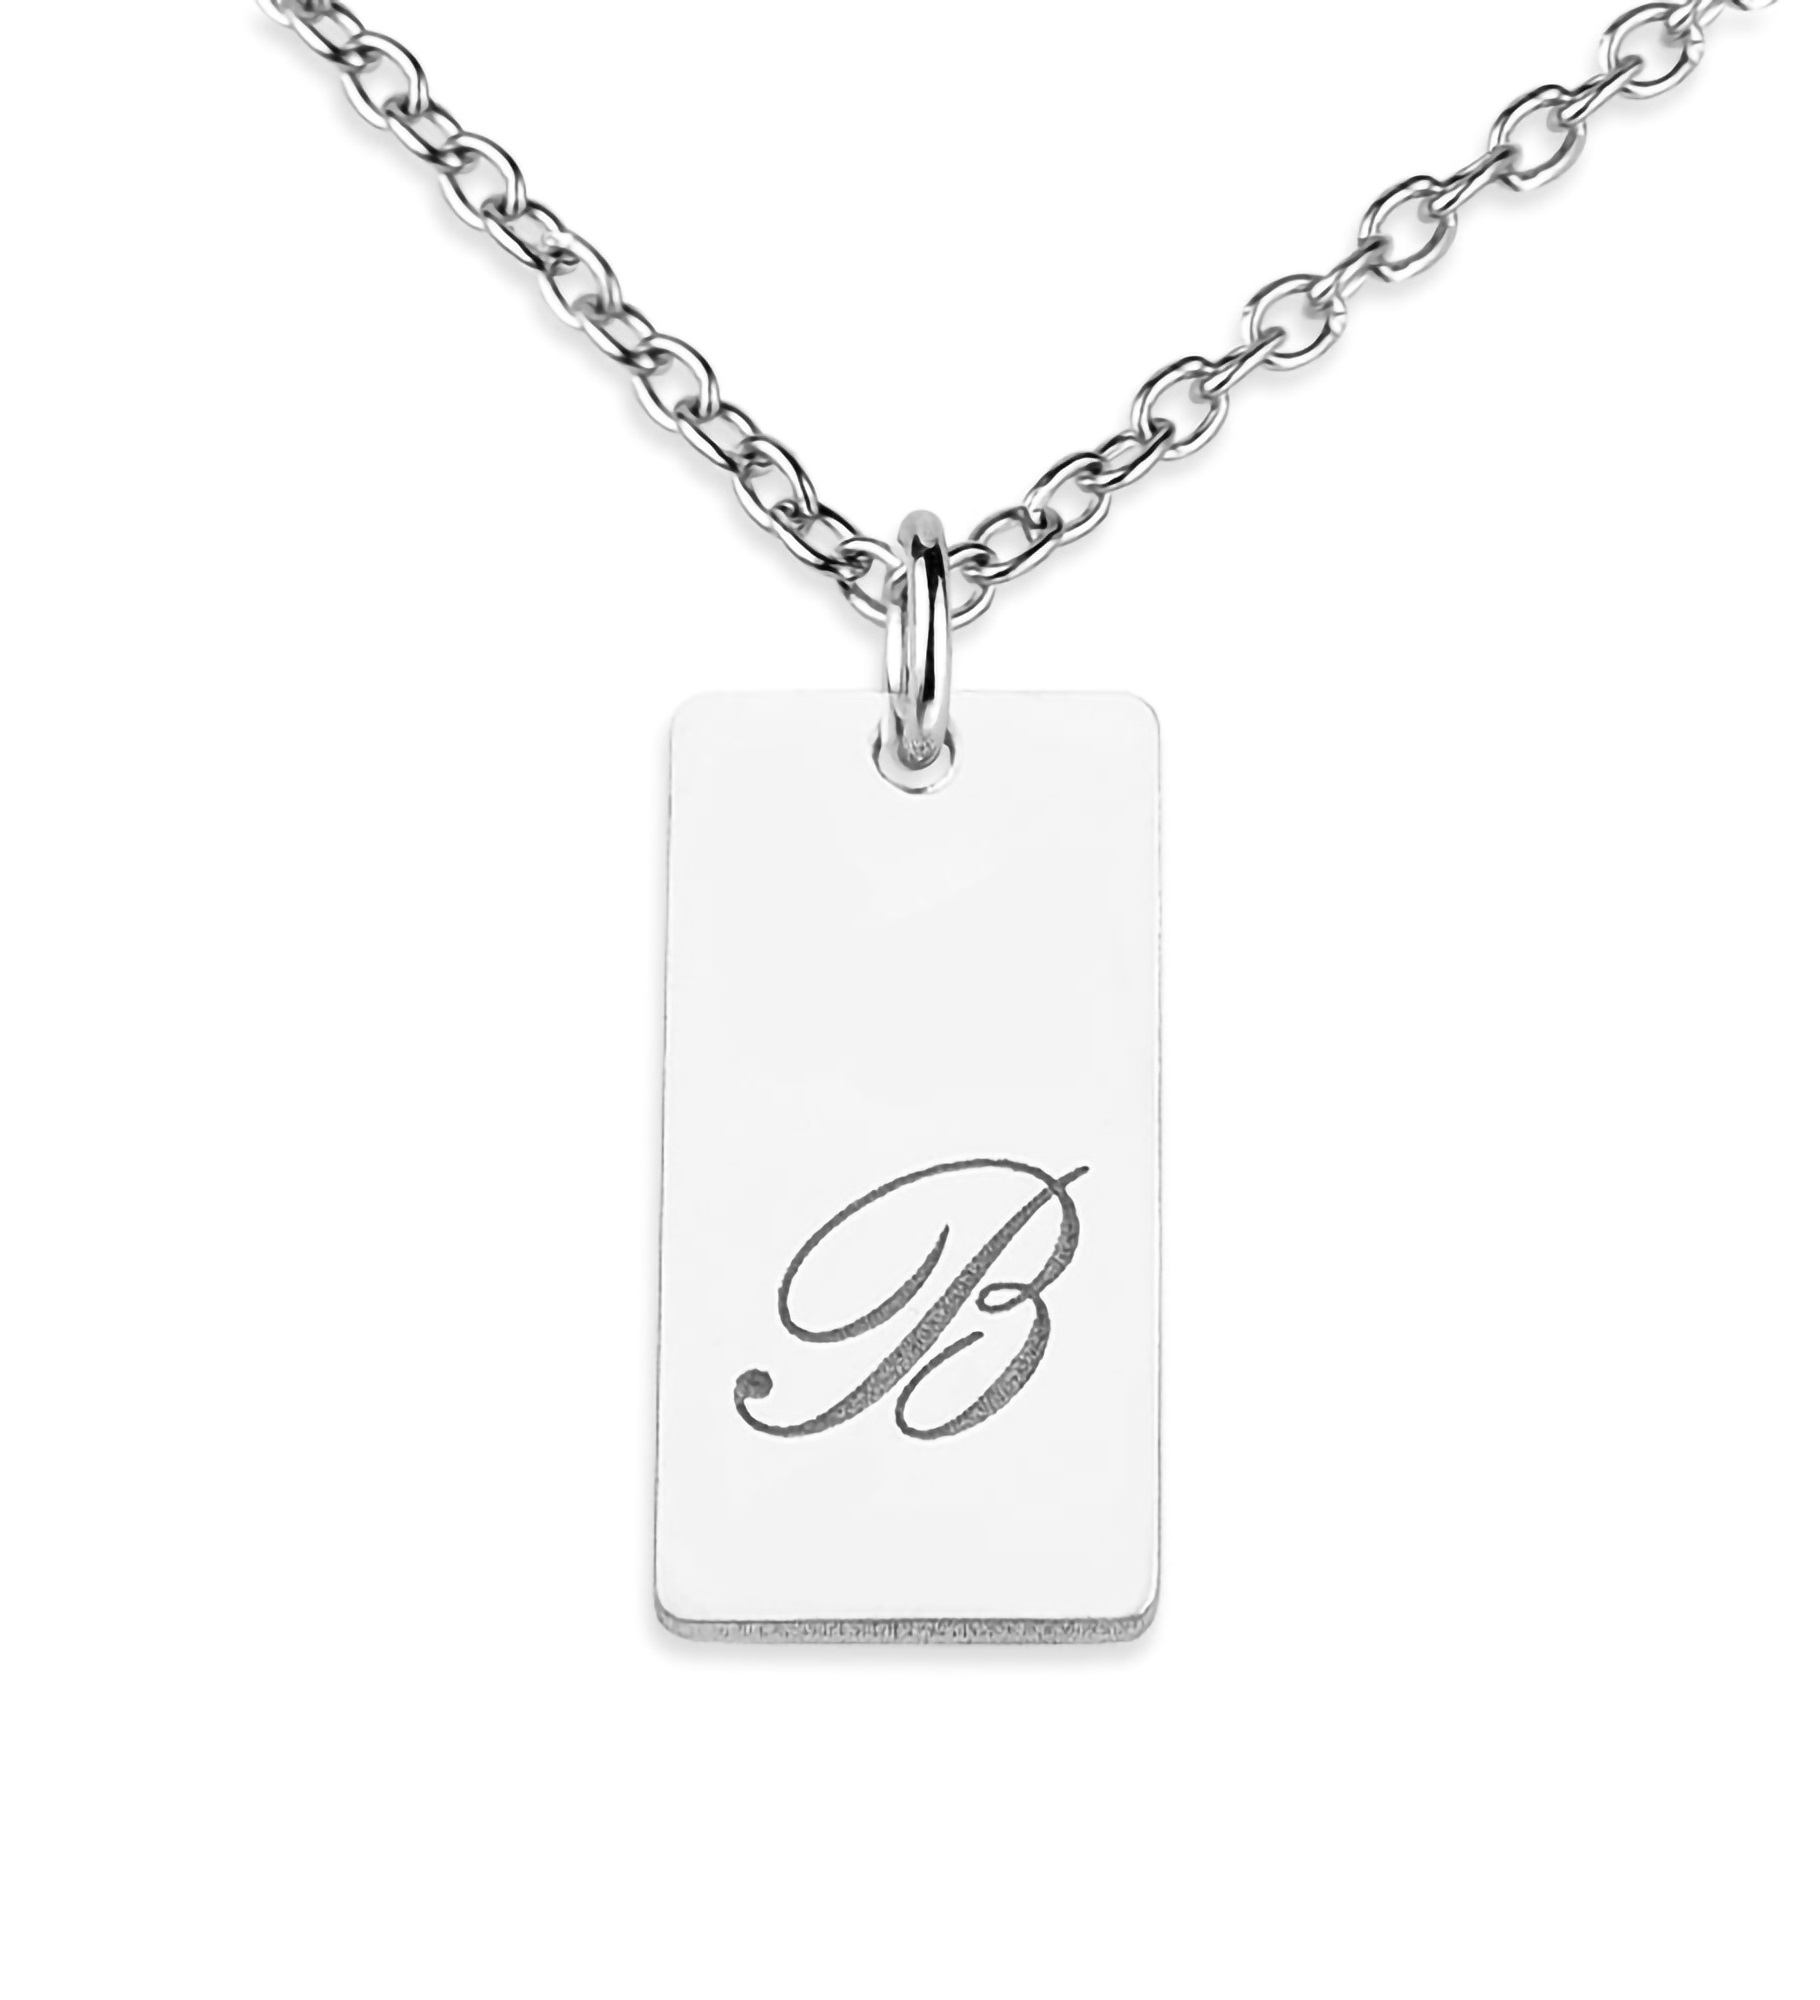 Personalized Dainty Initial Pendant